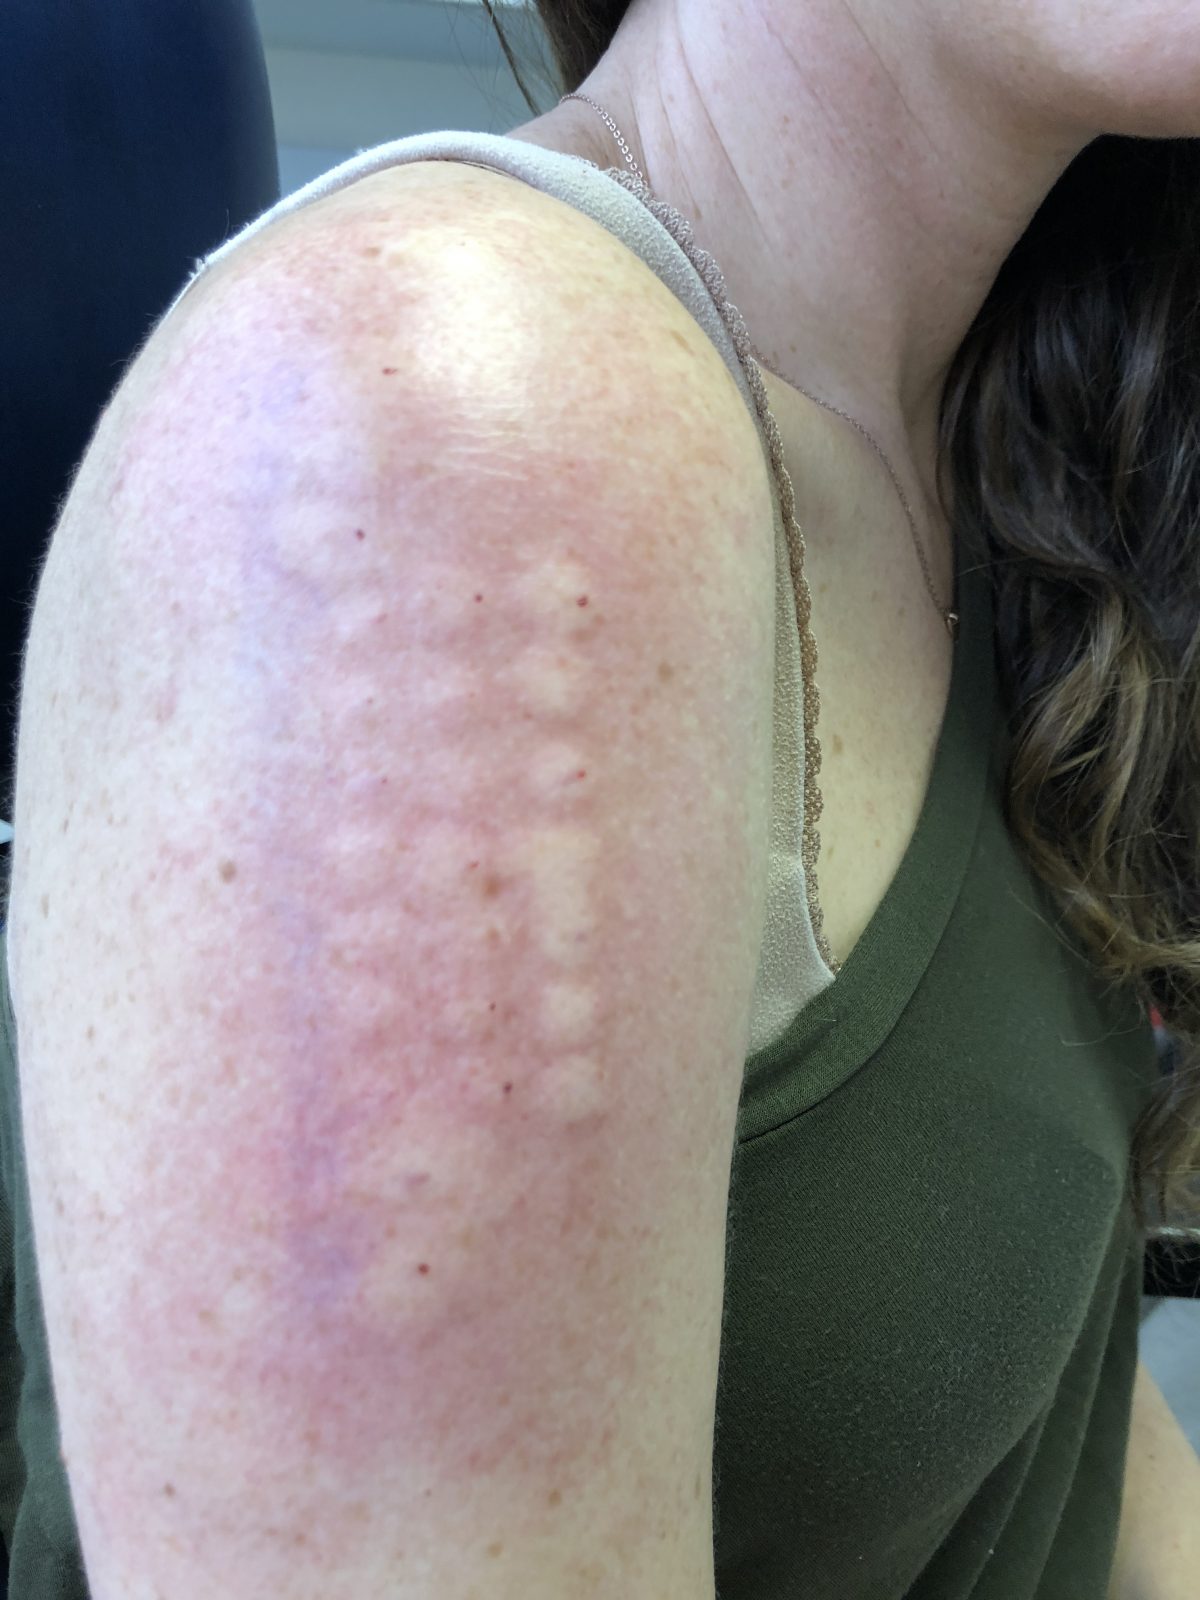 Allergy Testing Results on an Arm